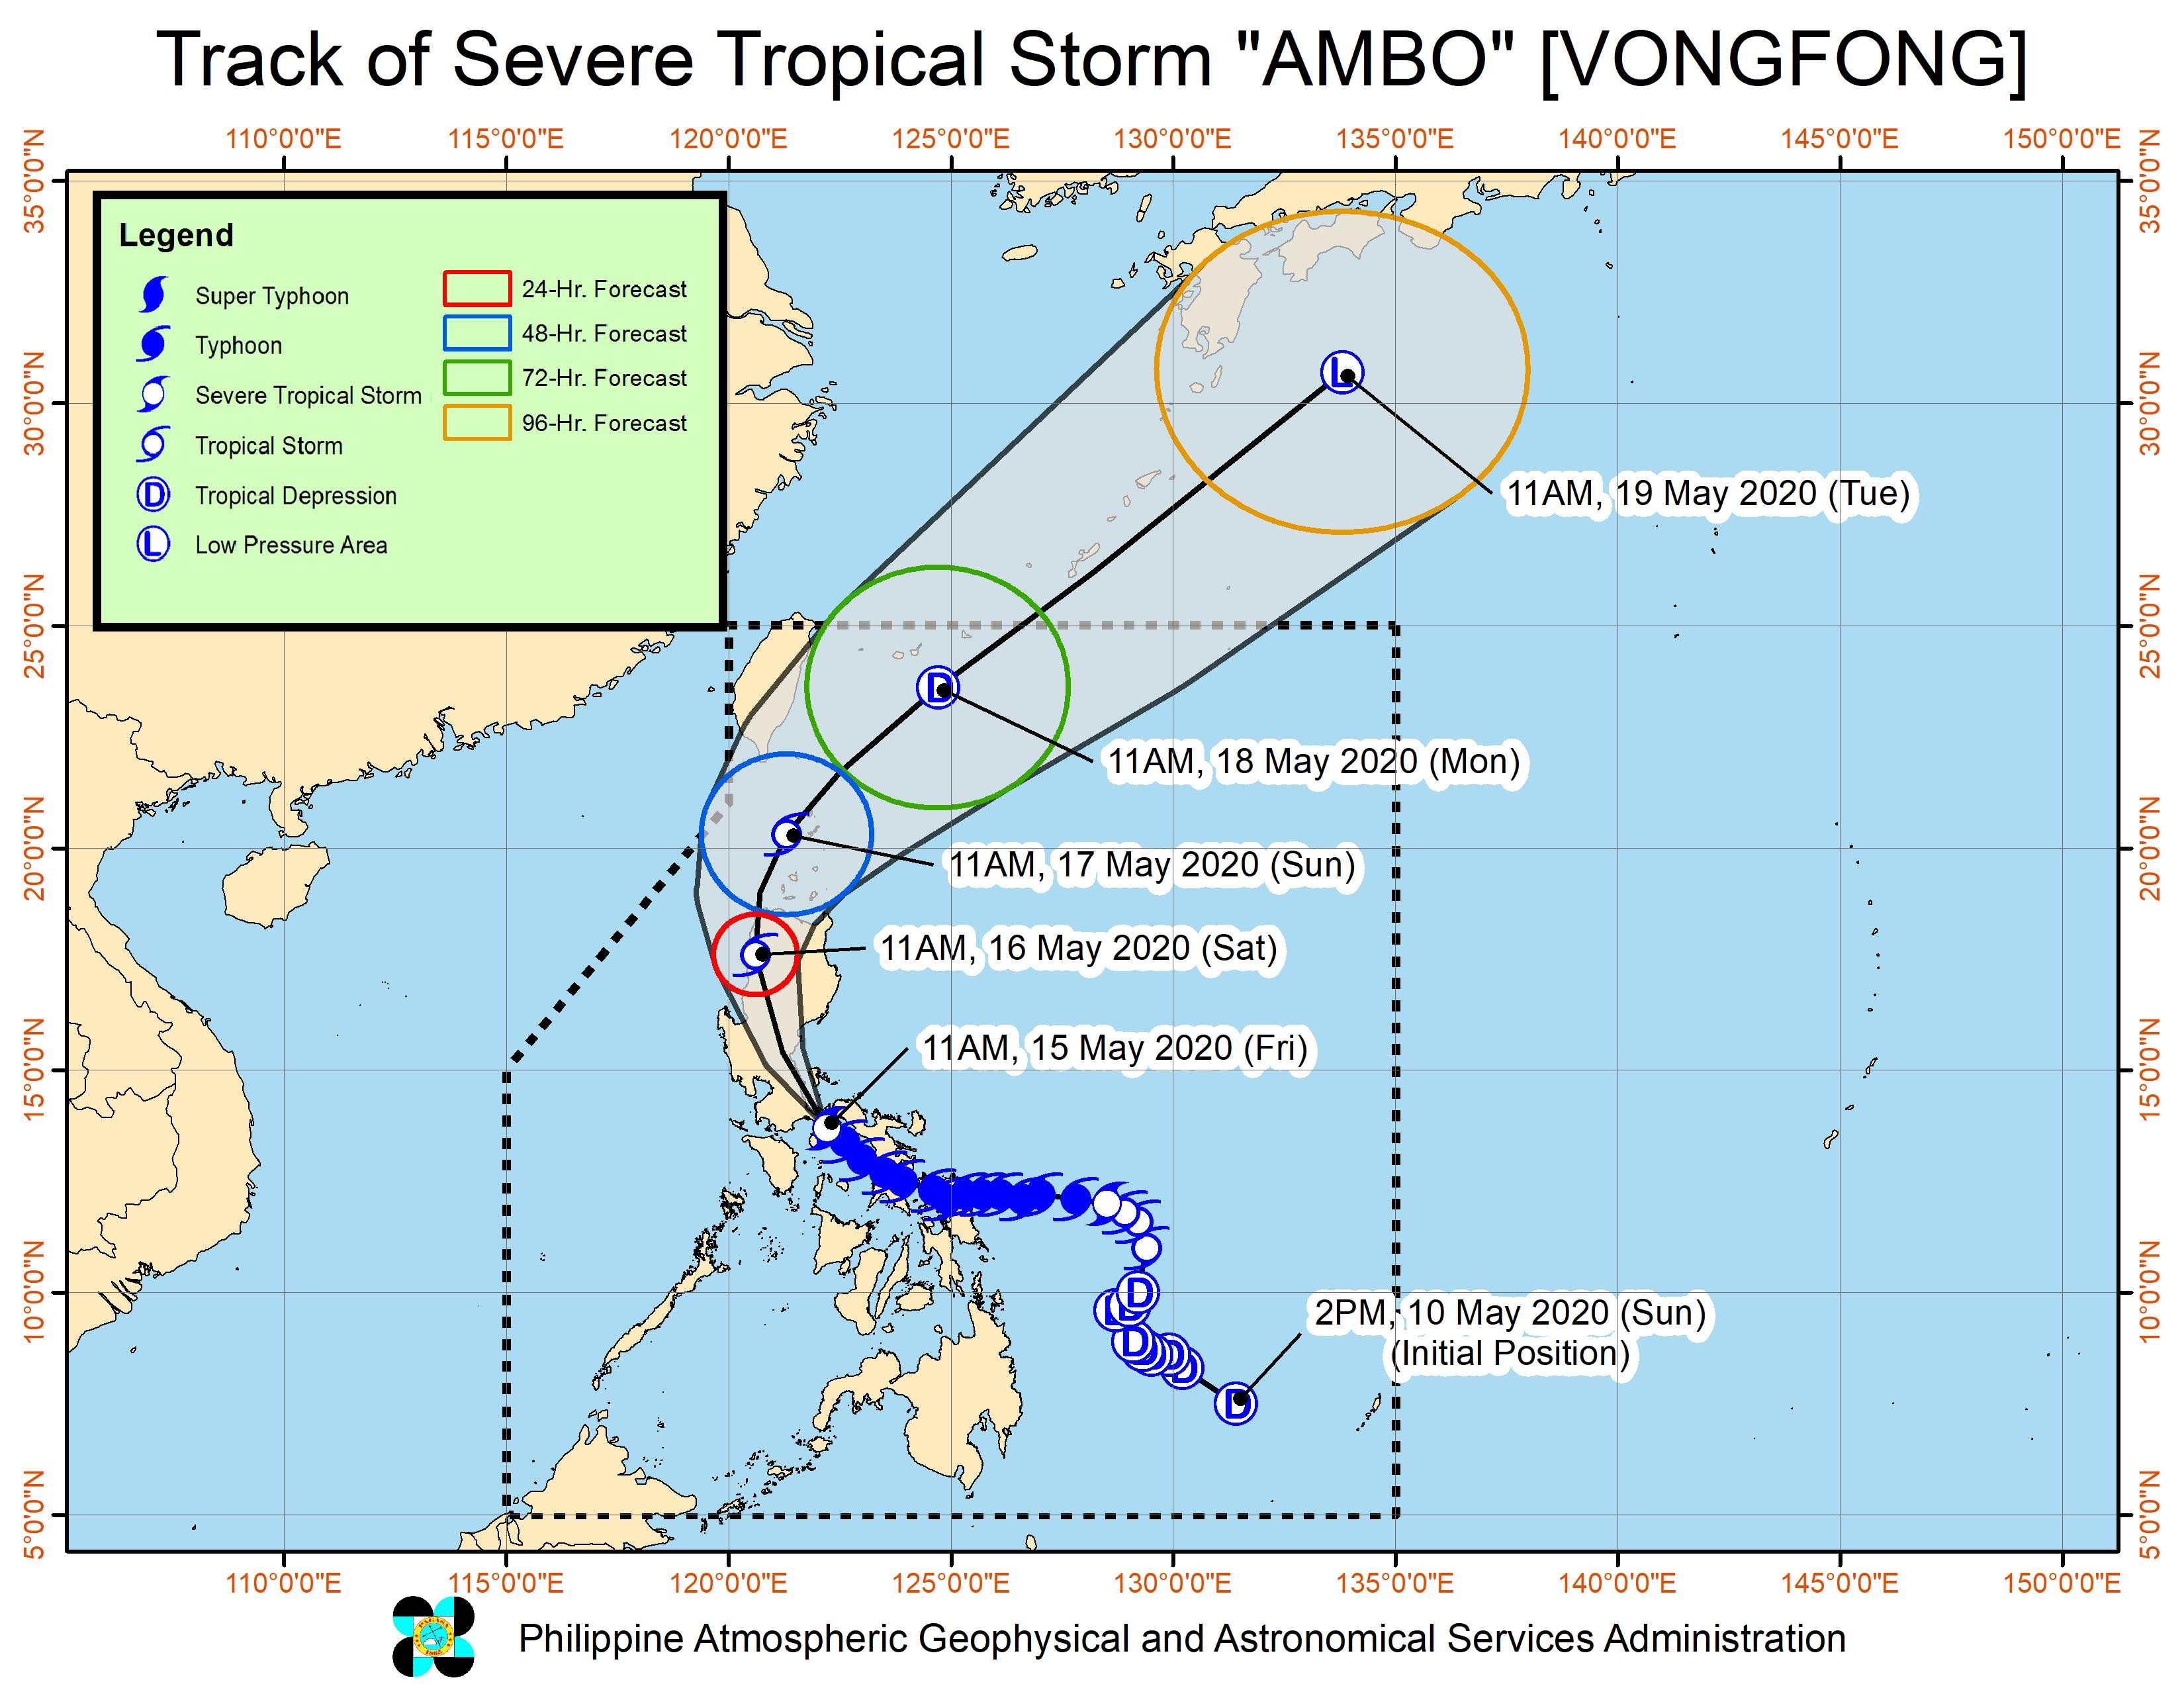 Forecast track of Severe Tropical Storm Ambo (Vongfong) as of May 15, 2020, 2 pm. Image from PAGASA 